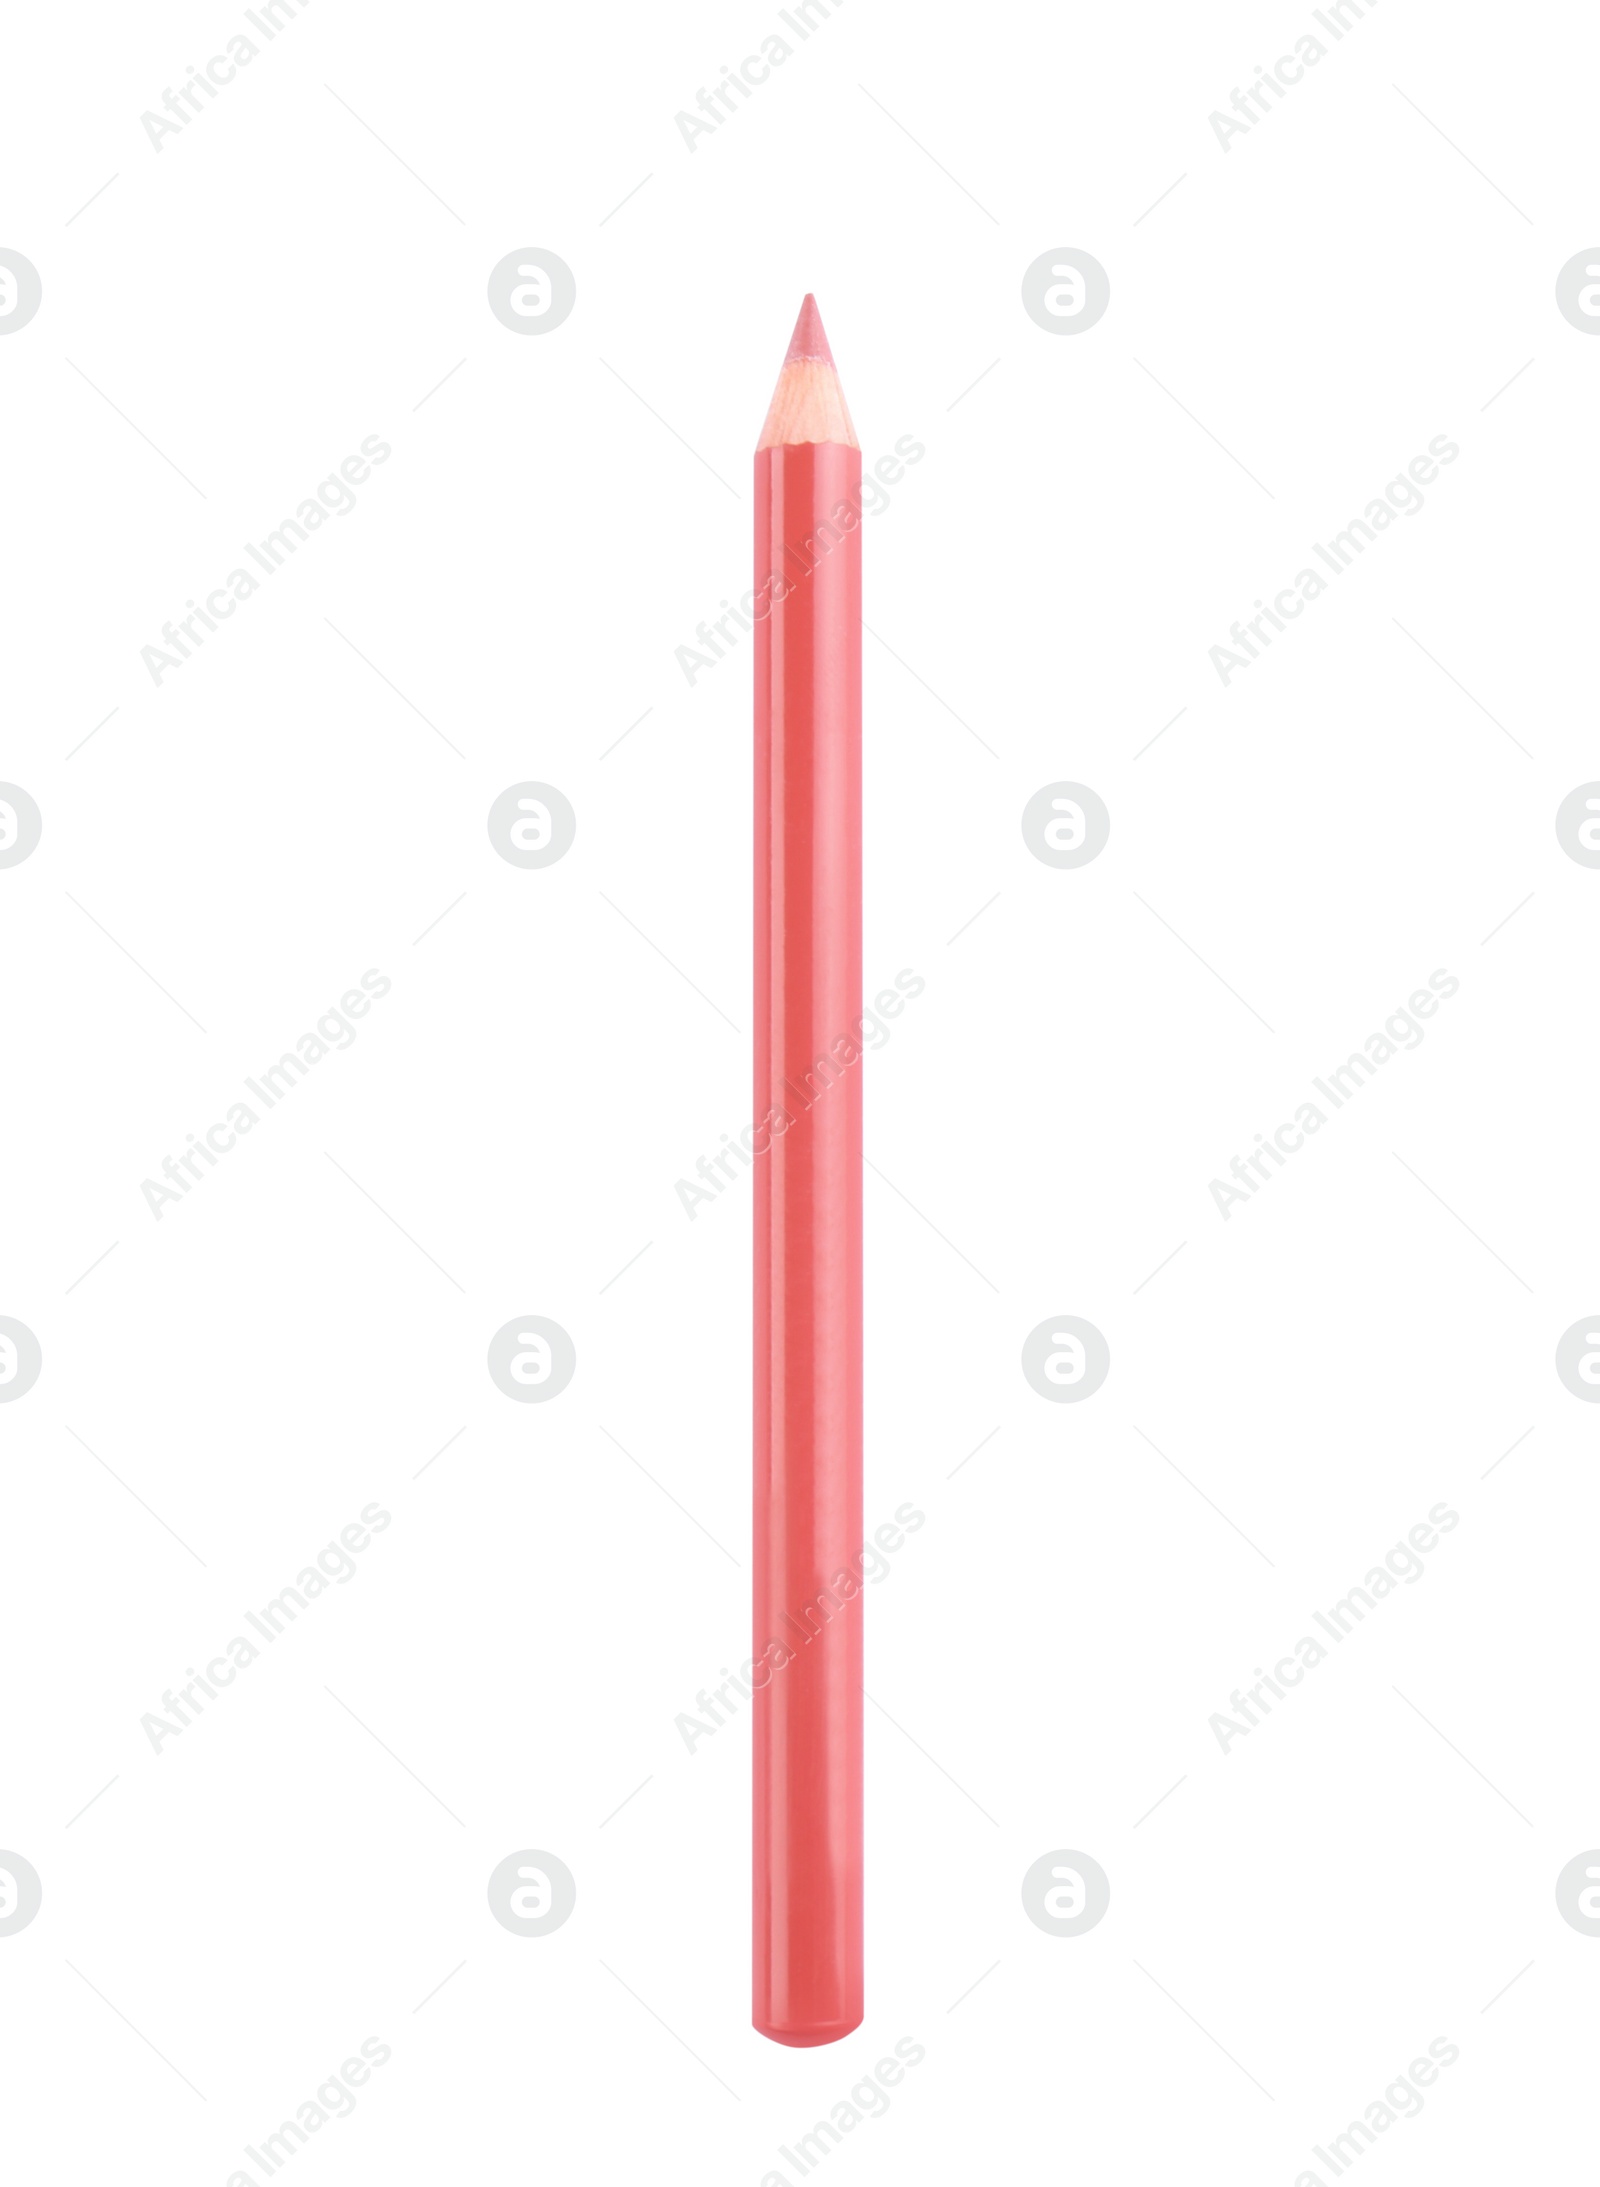 Photo of Lip pencil isolated on white, top view. Cosmetic product